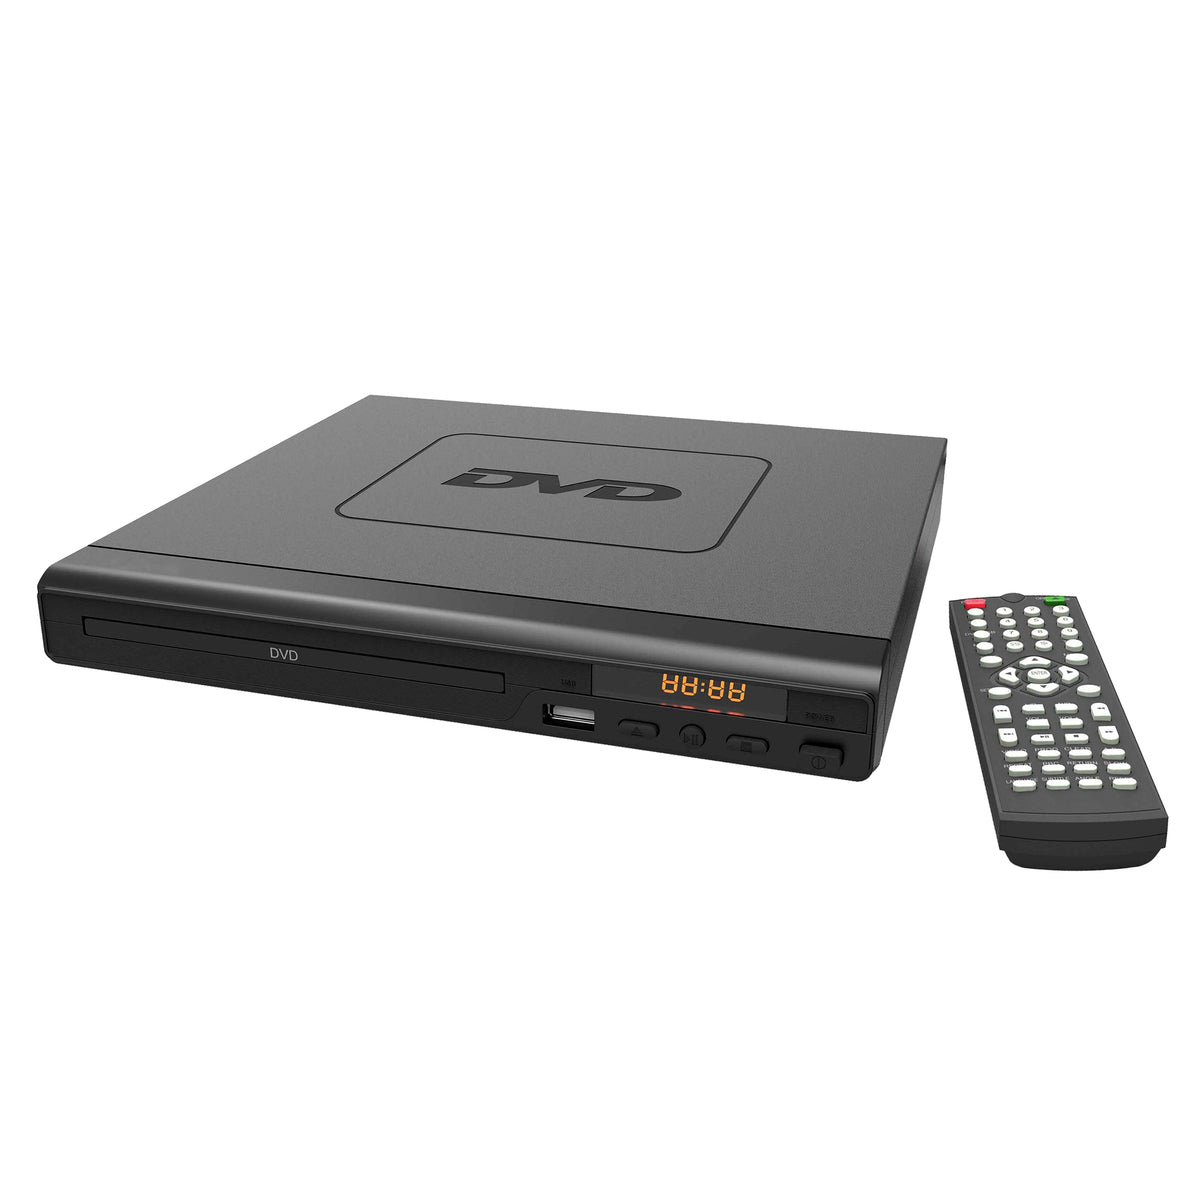 Top view of the Mini-Size DVD Player with the remote next to it.